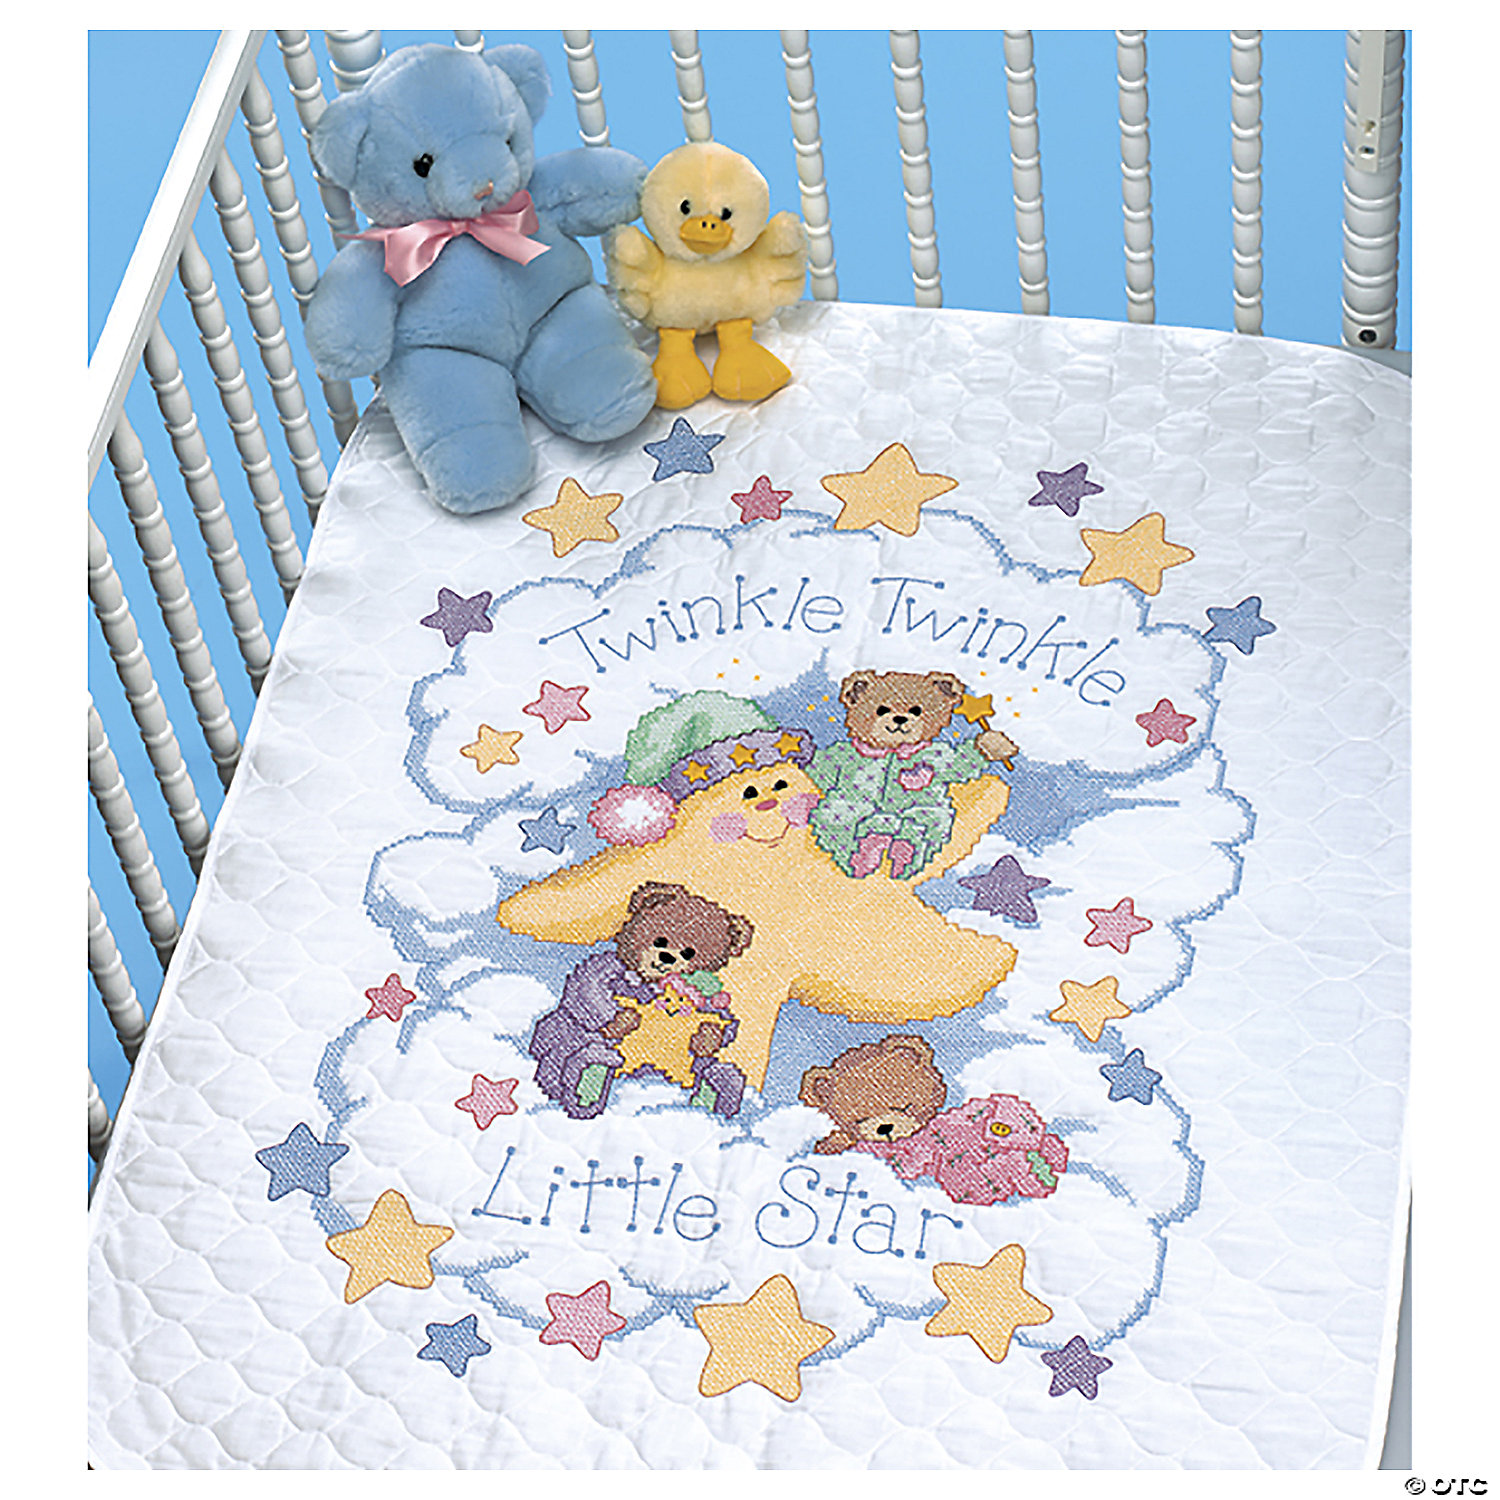 Eeyore and Butterflies Baby Quilt Stamped Cross Stitch Kit